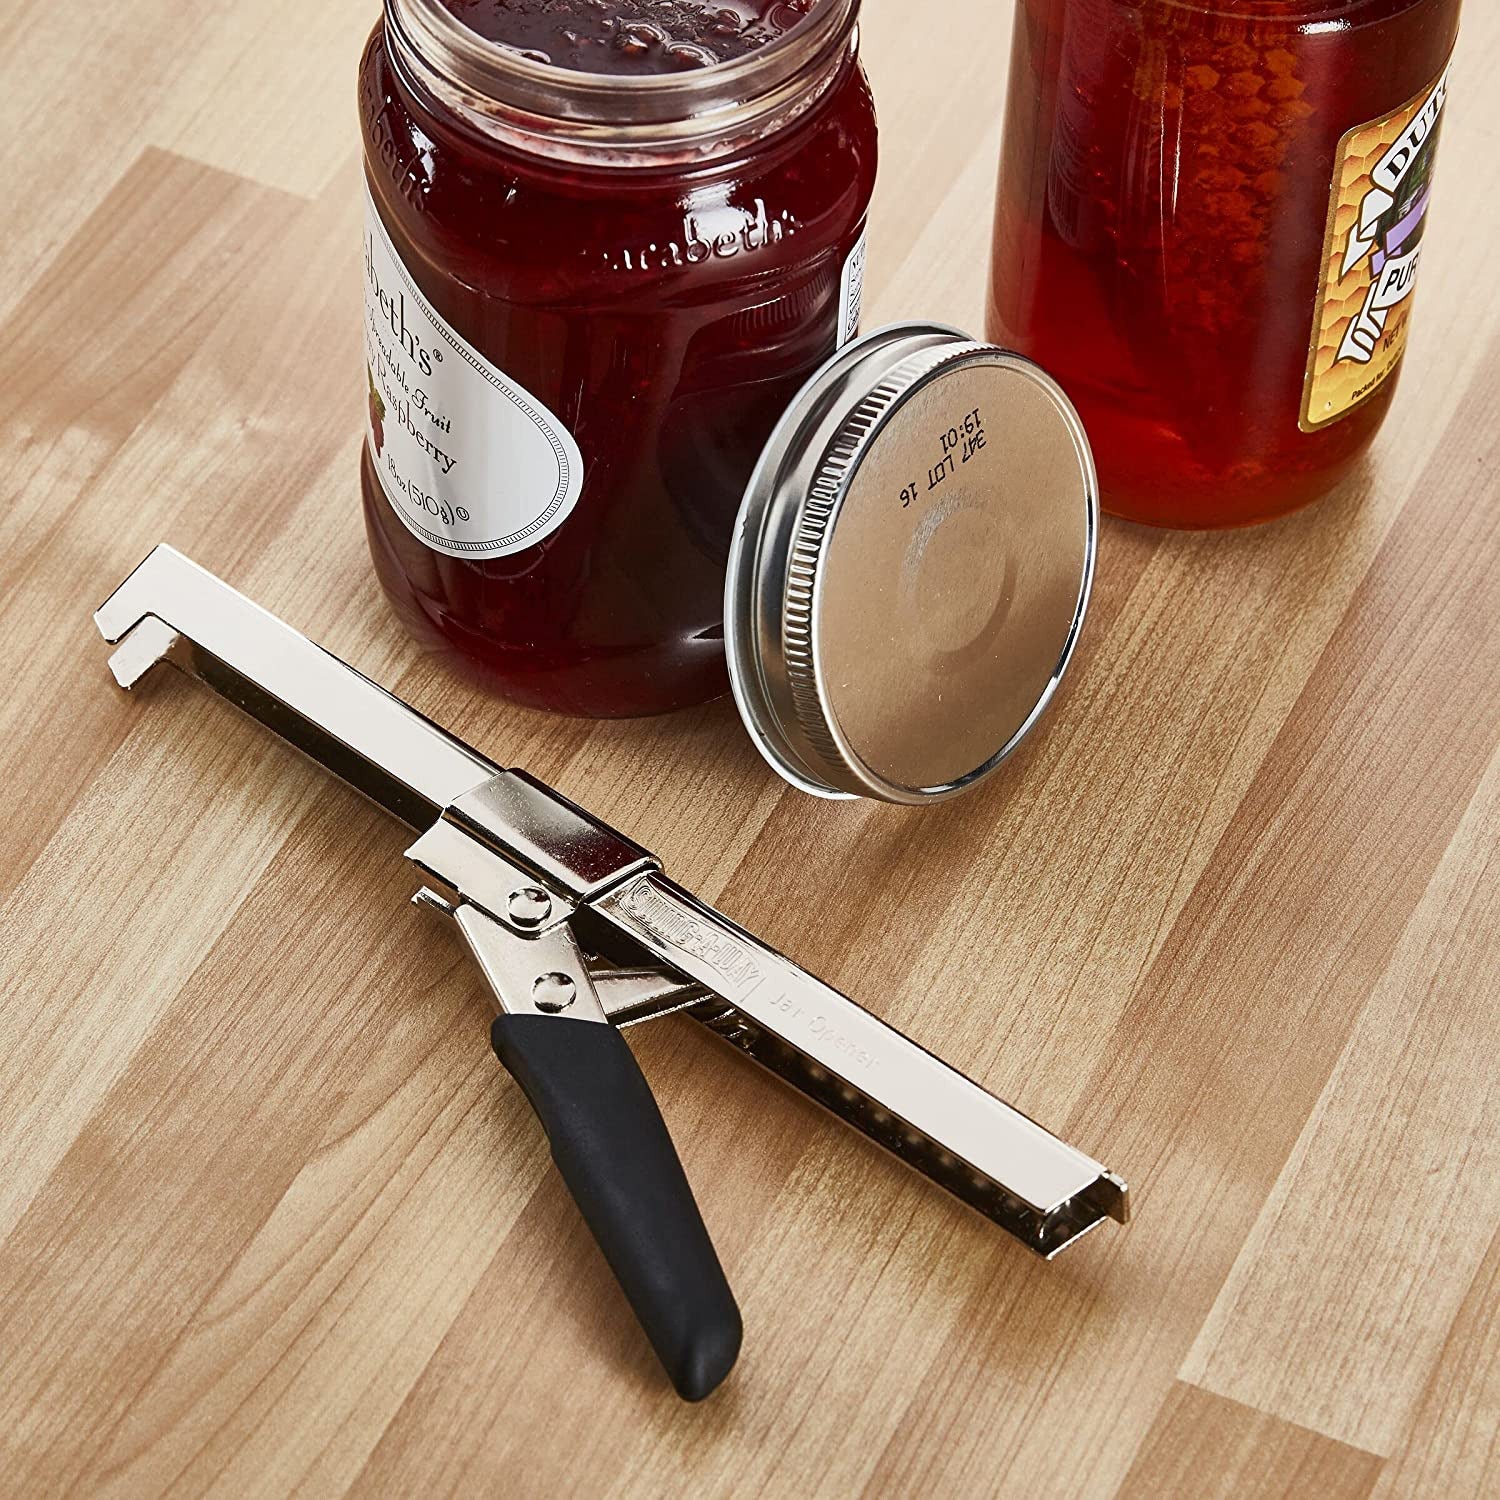 Good Grips Twist Jar Opener with Base Pad by OXO